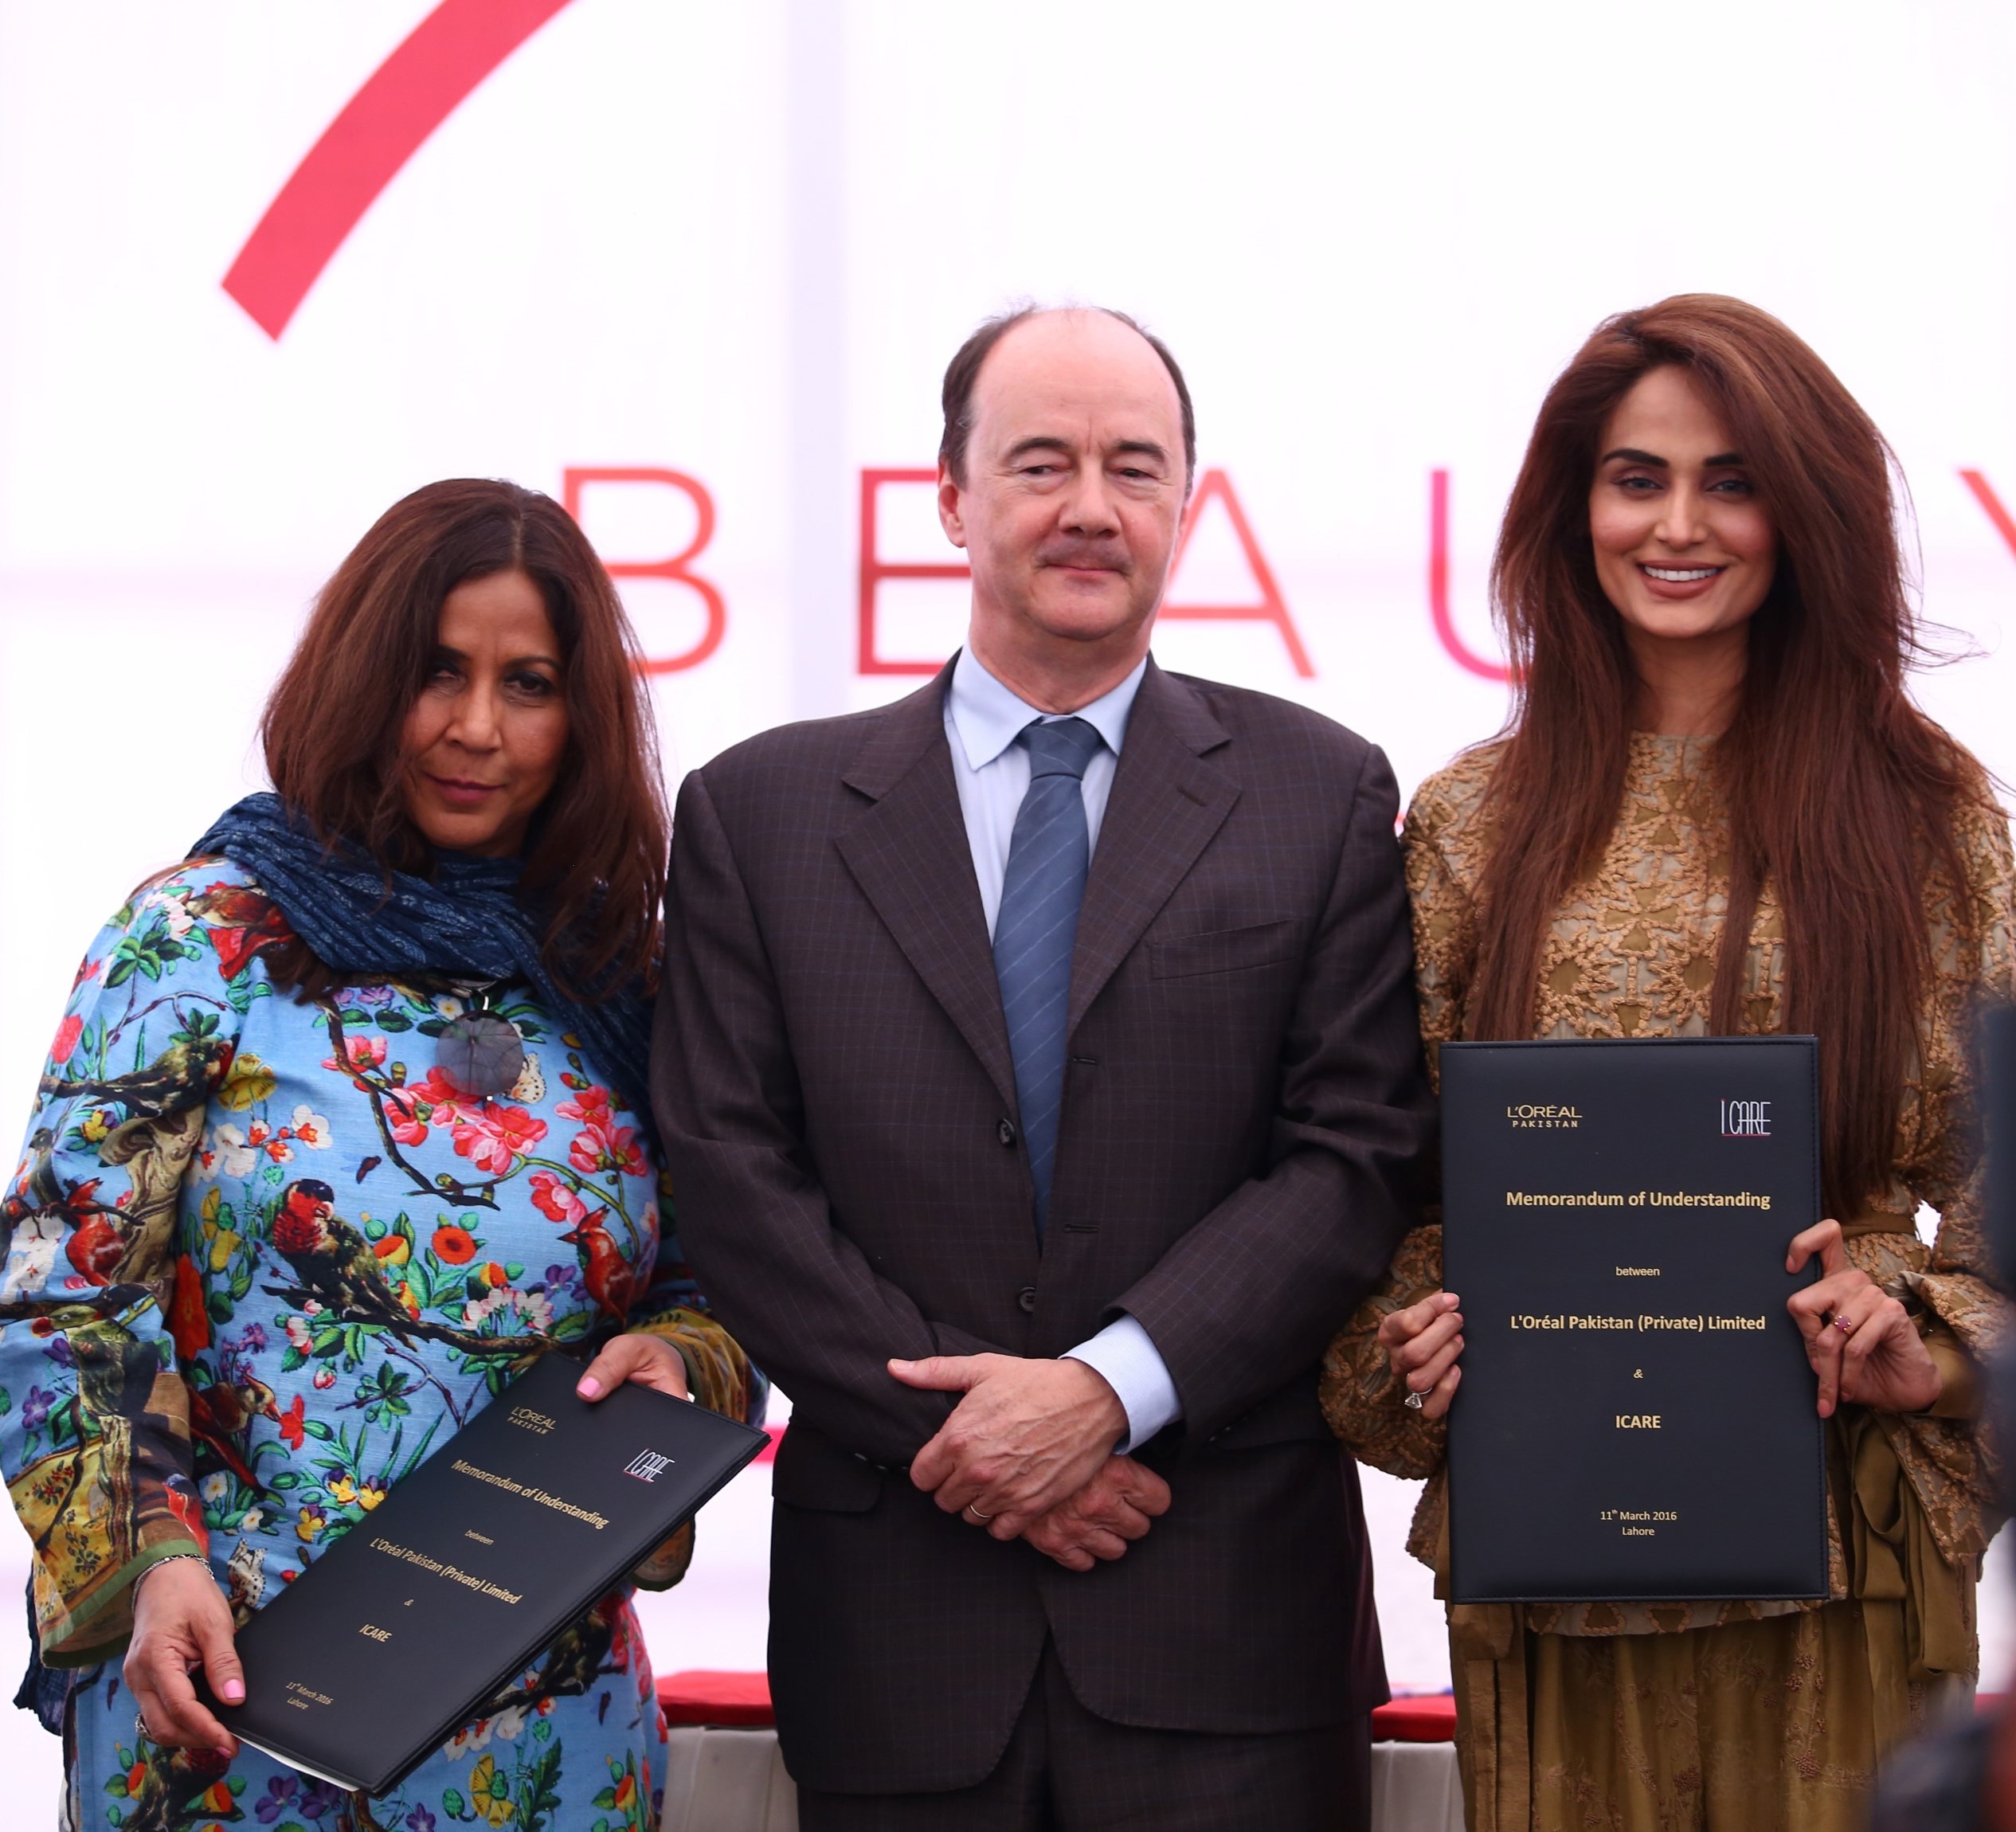 Geoff Skingsley%2c Executive Vice President L%27Oréal Middle East and Africa%2c Musharaf Hai%2c Managing Director L%27Oréal Pakistan and Mehreen Syed%2c Chairperson ICARE (2)